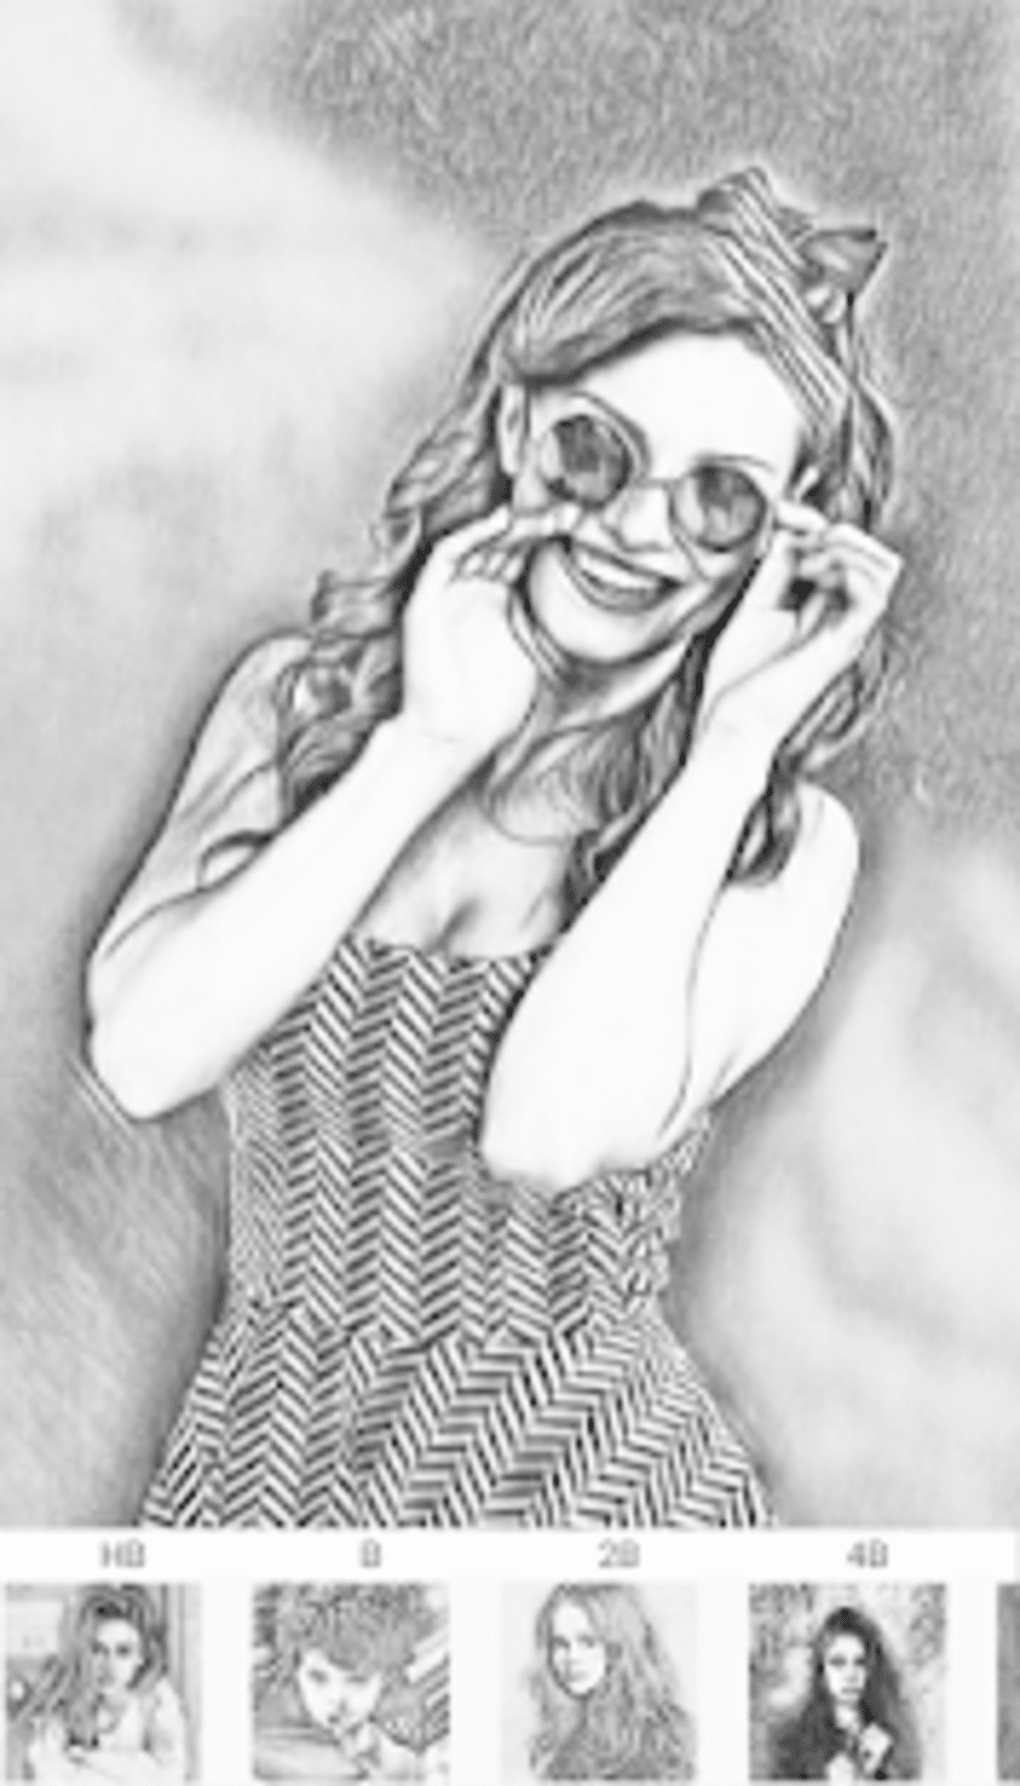 Easy Pencil Photo Sketch Sketching Drawing Photo Editor Download with Realistic